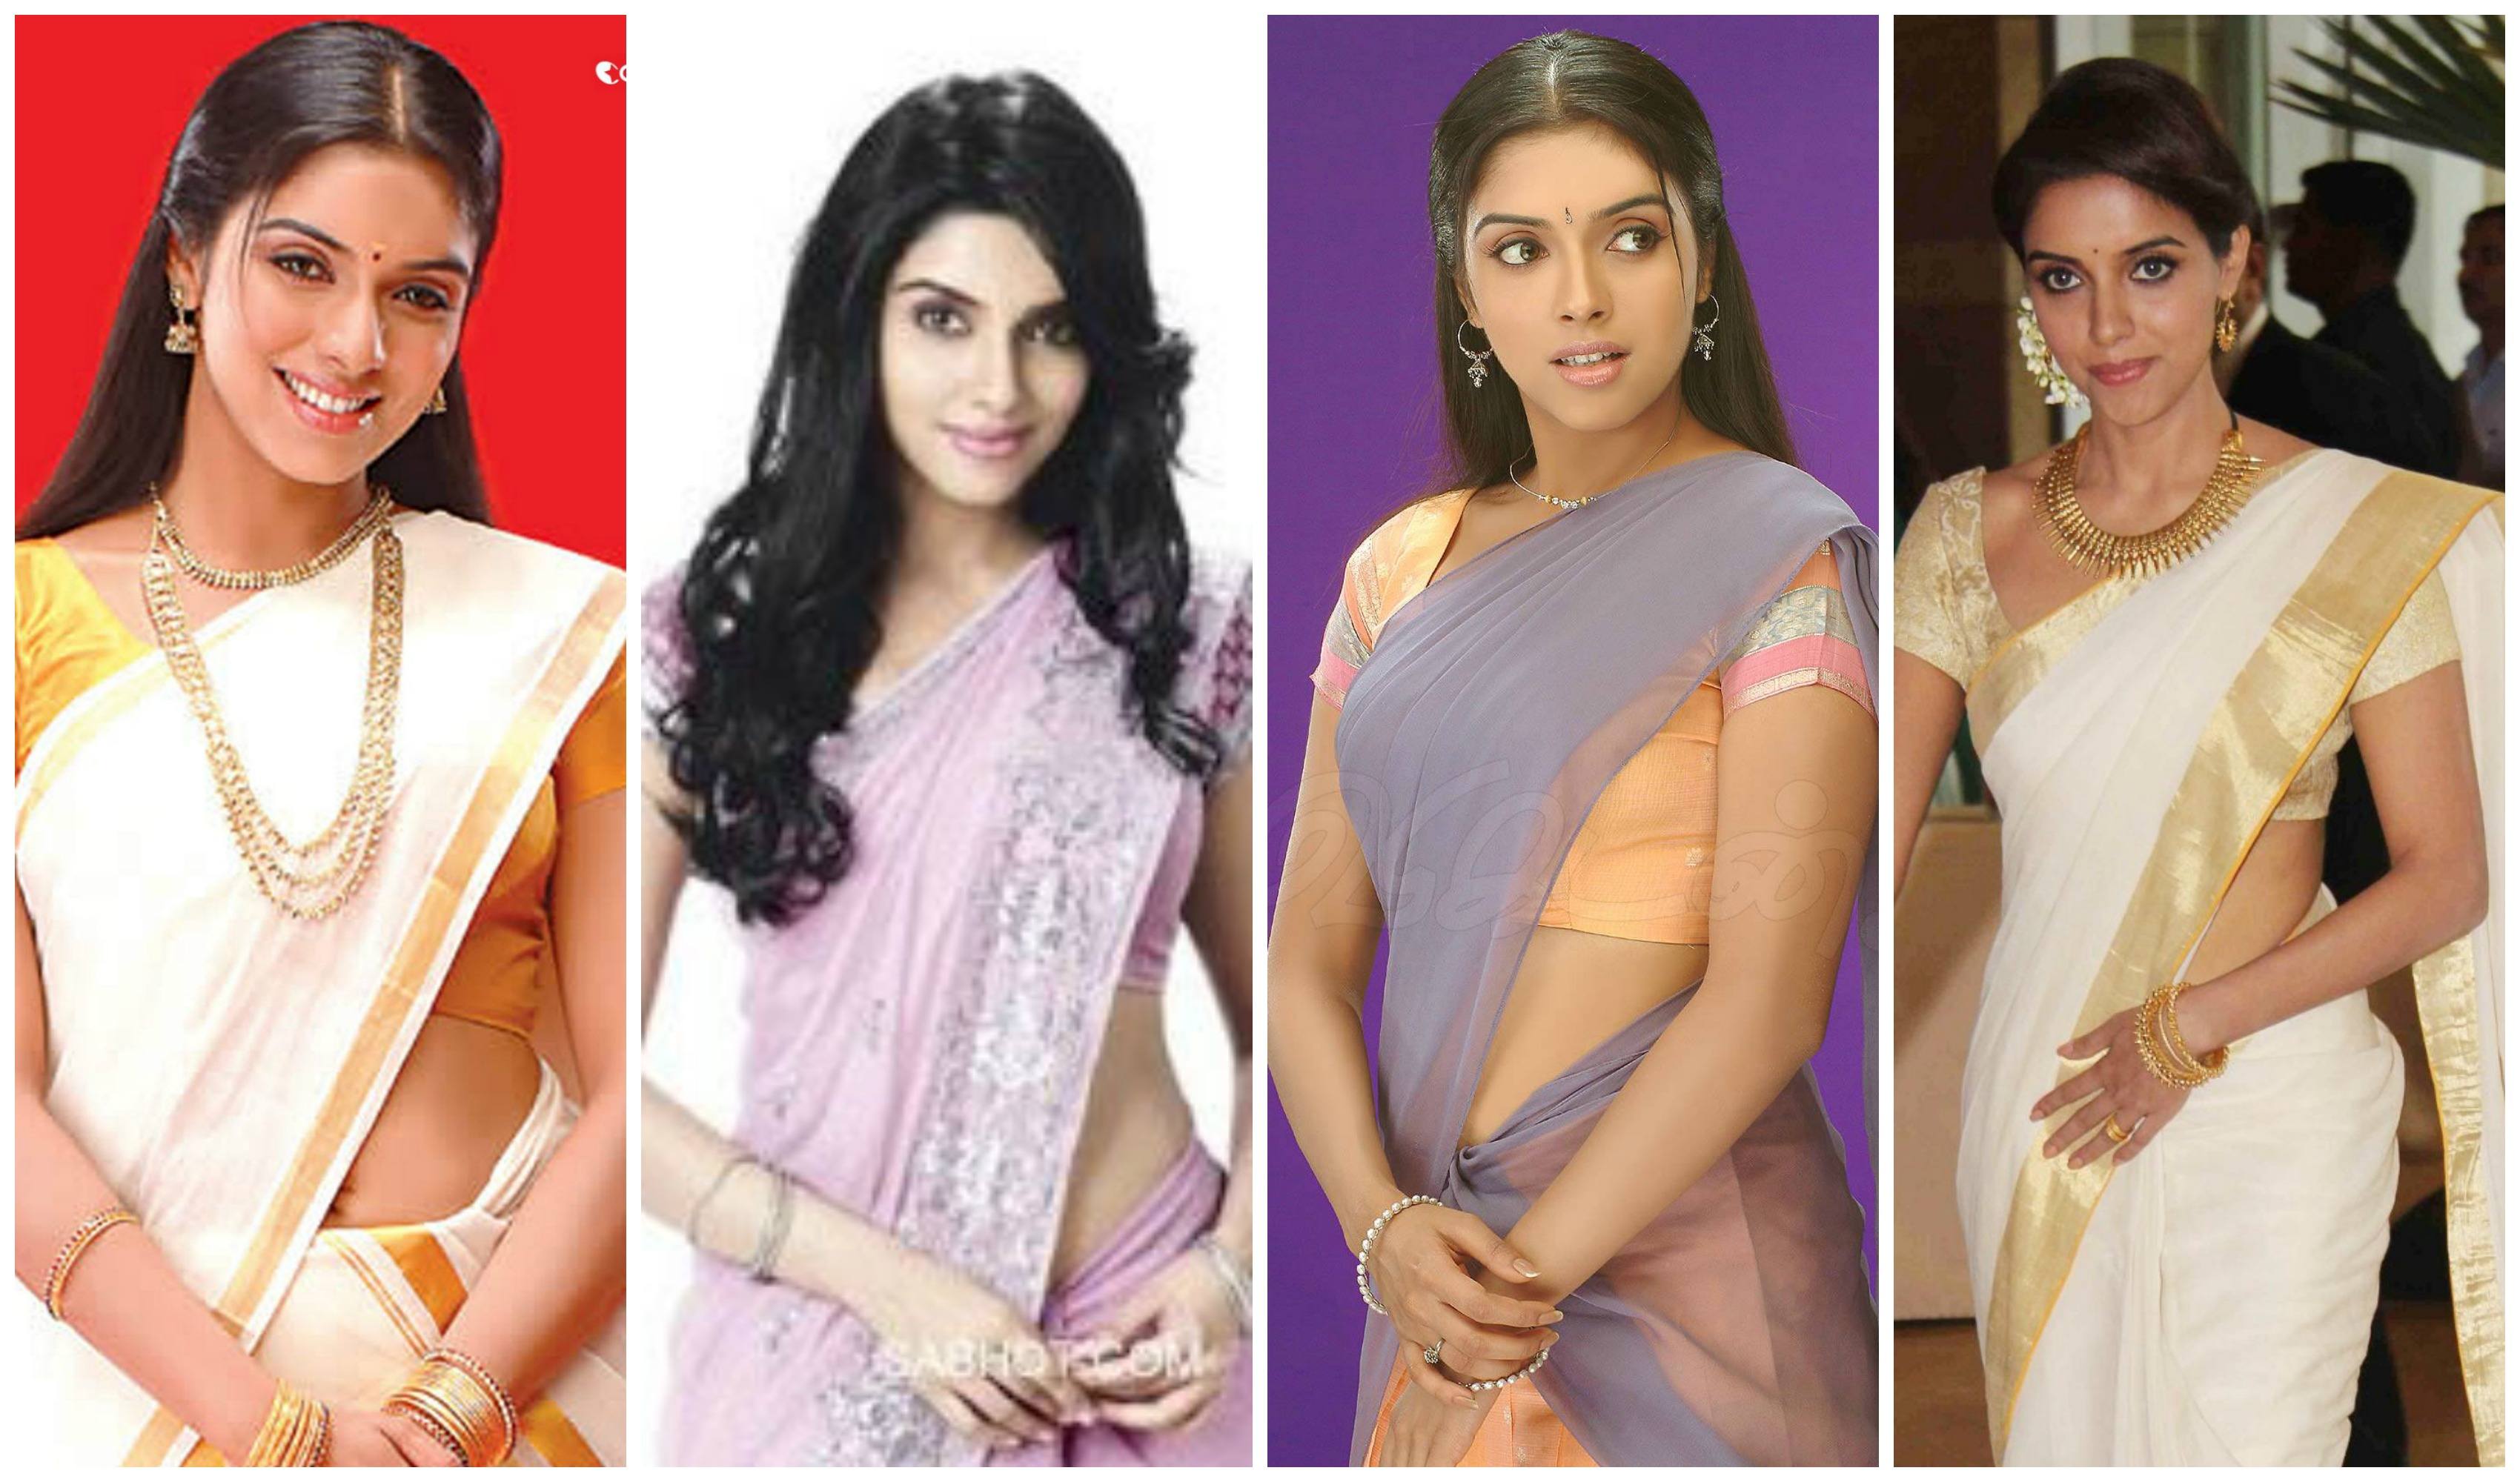 How to Wear Saree for Short Height? 14 Pro Tips for Short Girls